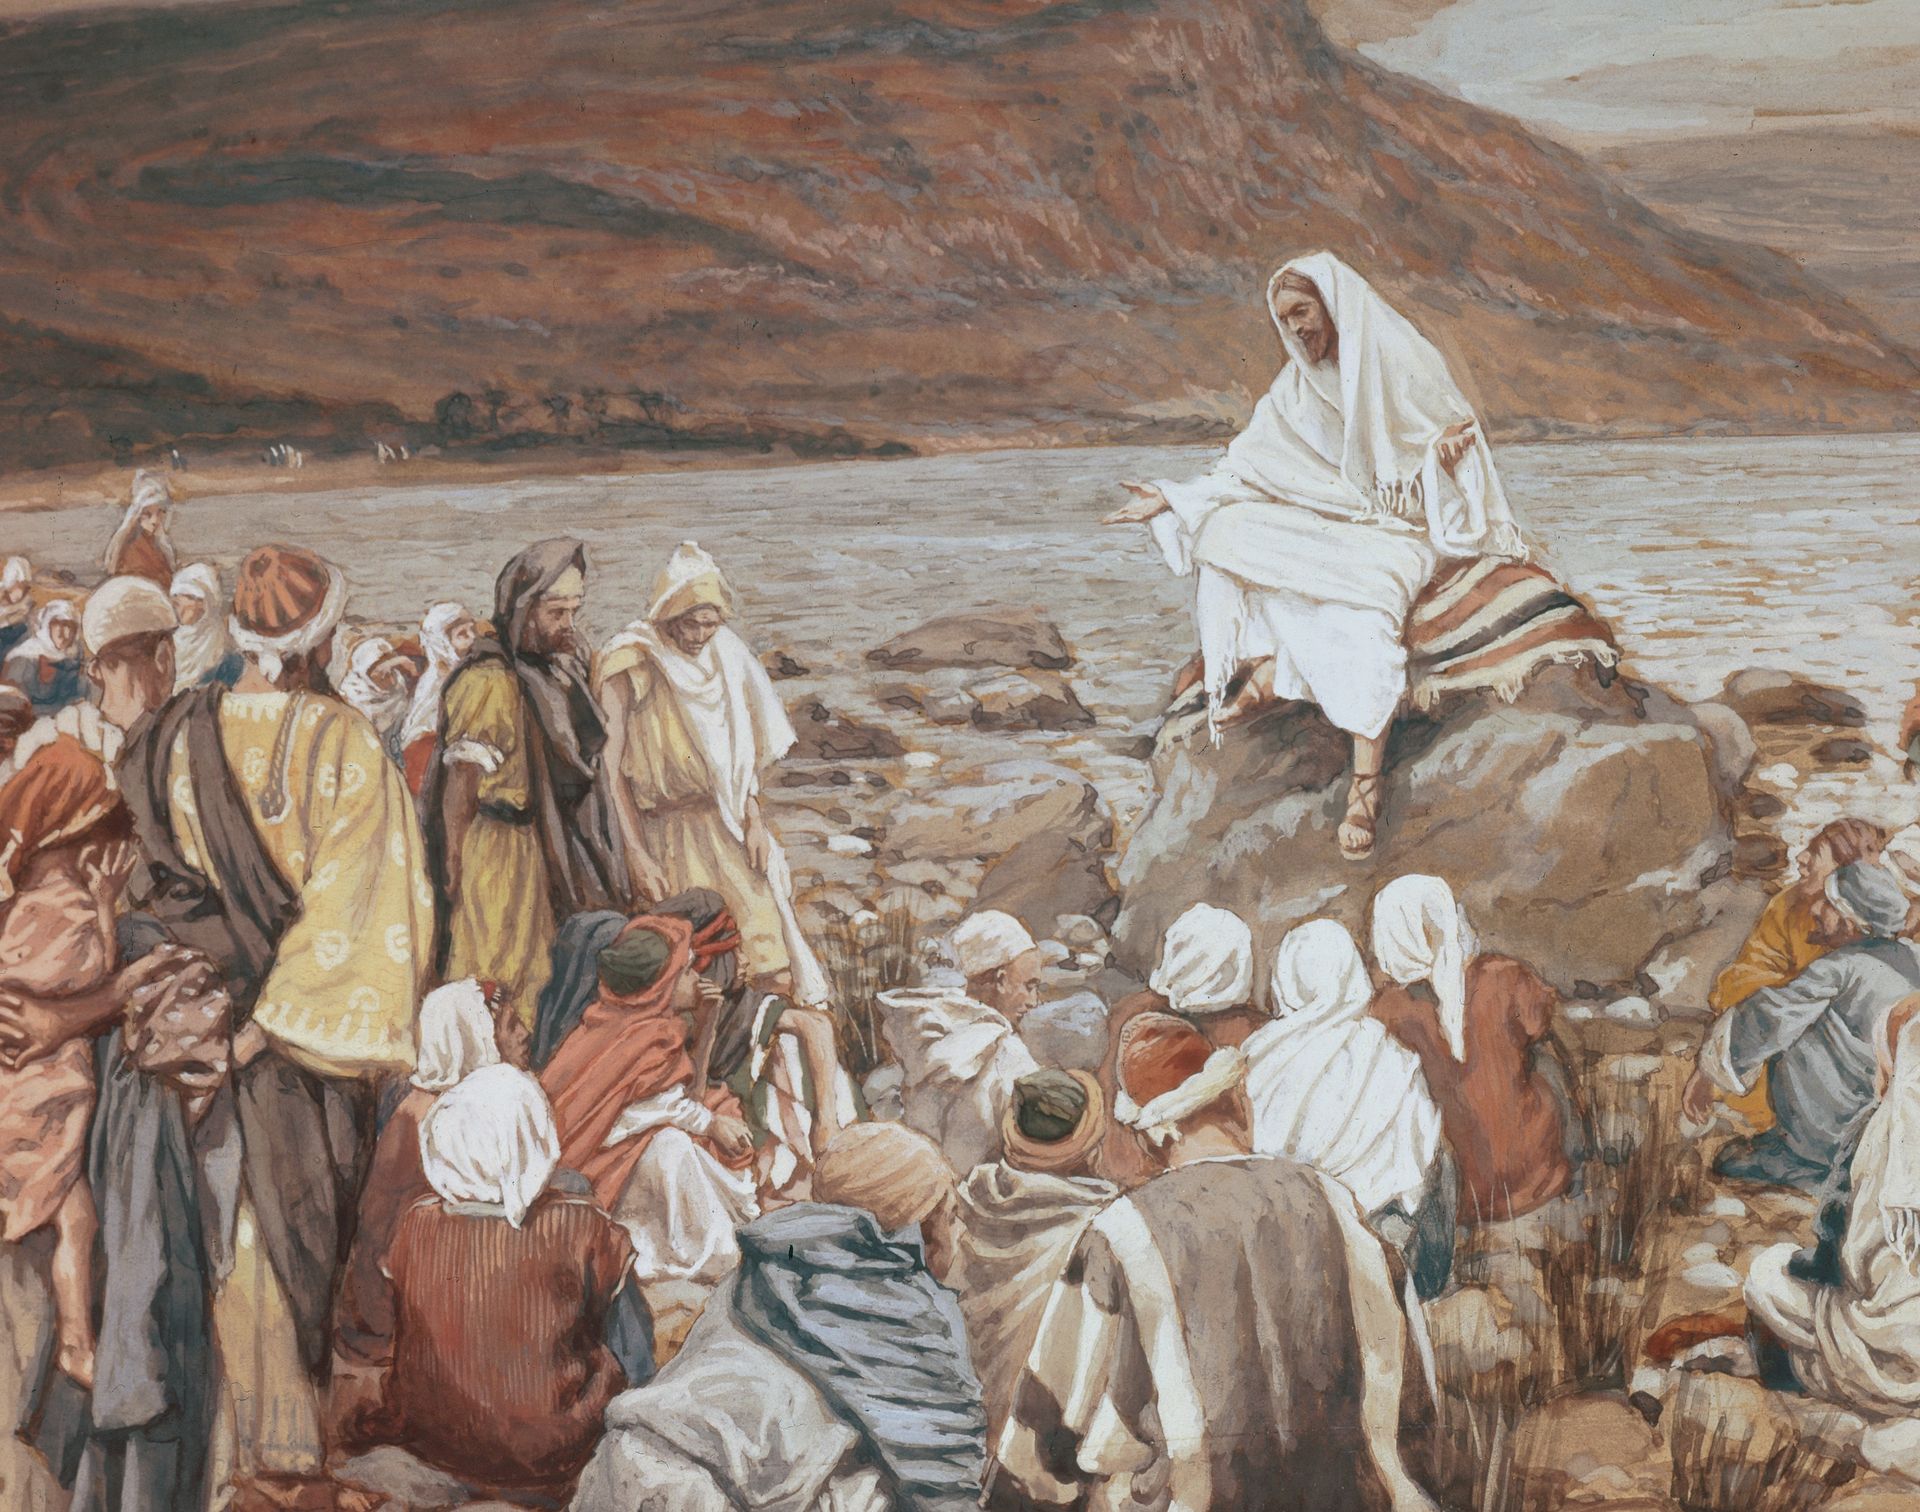 Jesus Teaching the People by the Seashore, by James Tissot